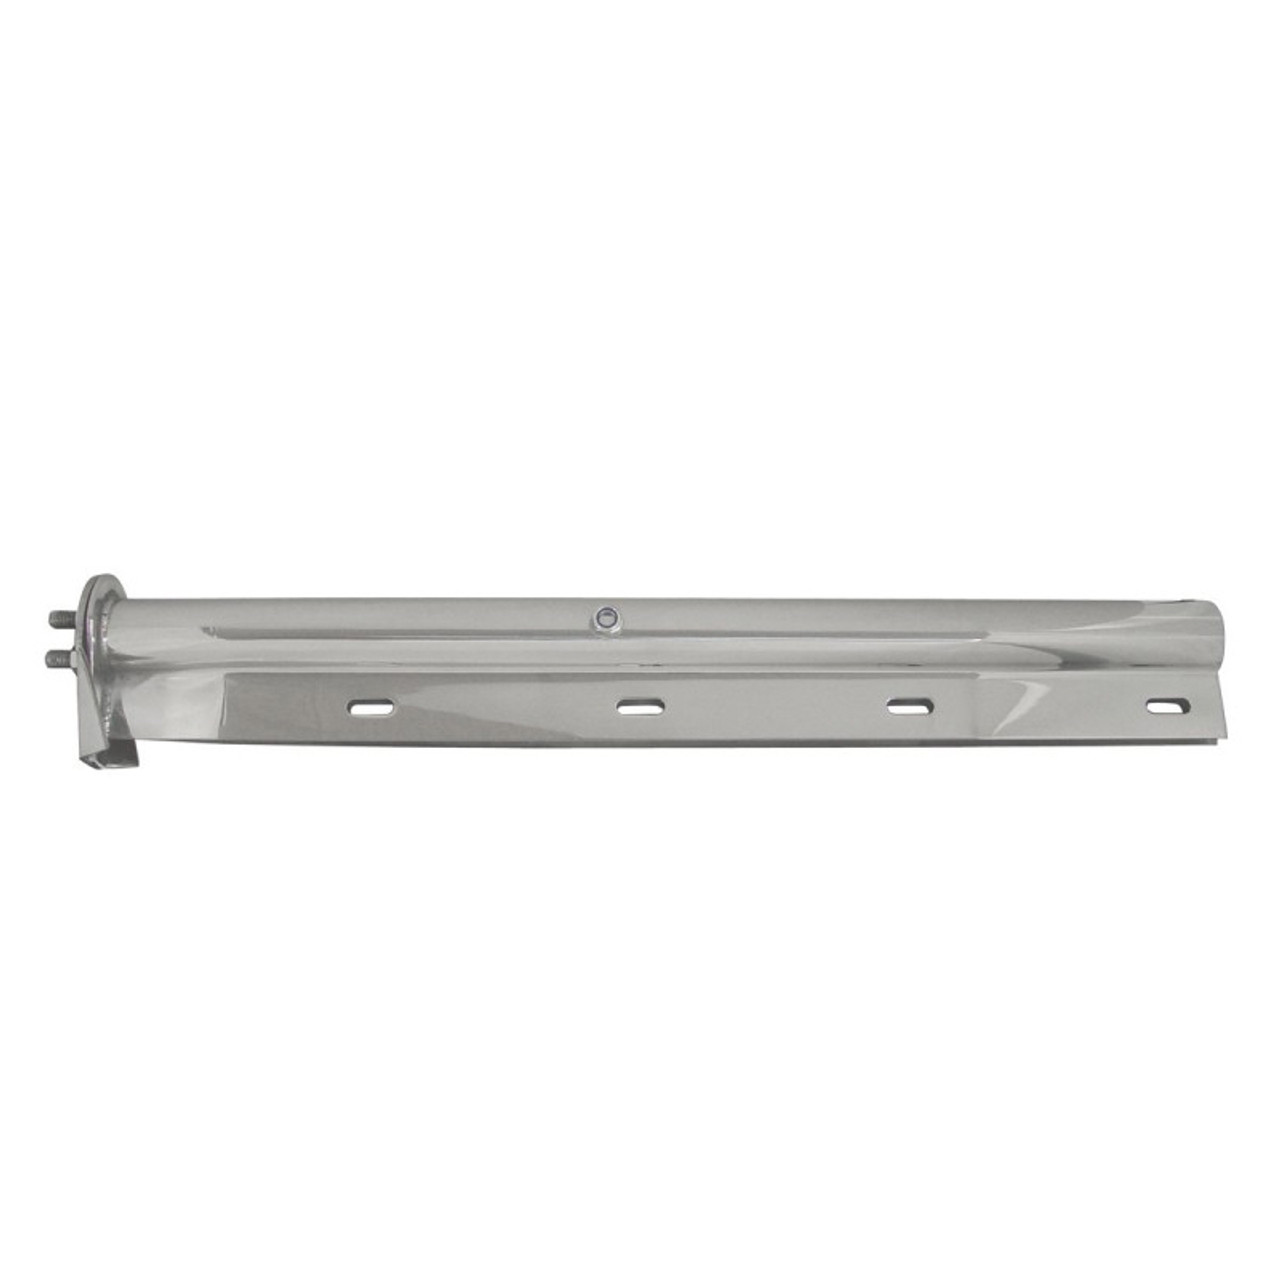 Stainless Steel Spring Loaded Mud Flap Hanger Light Bar By Grand General Raney S Truck Parts